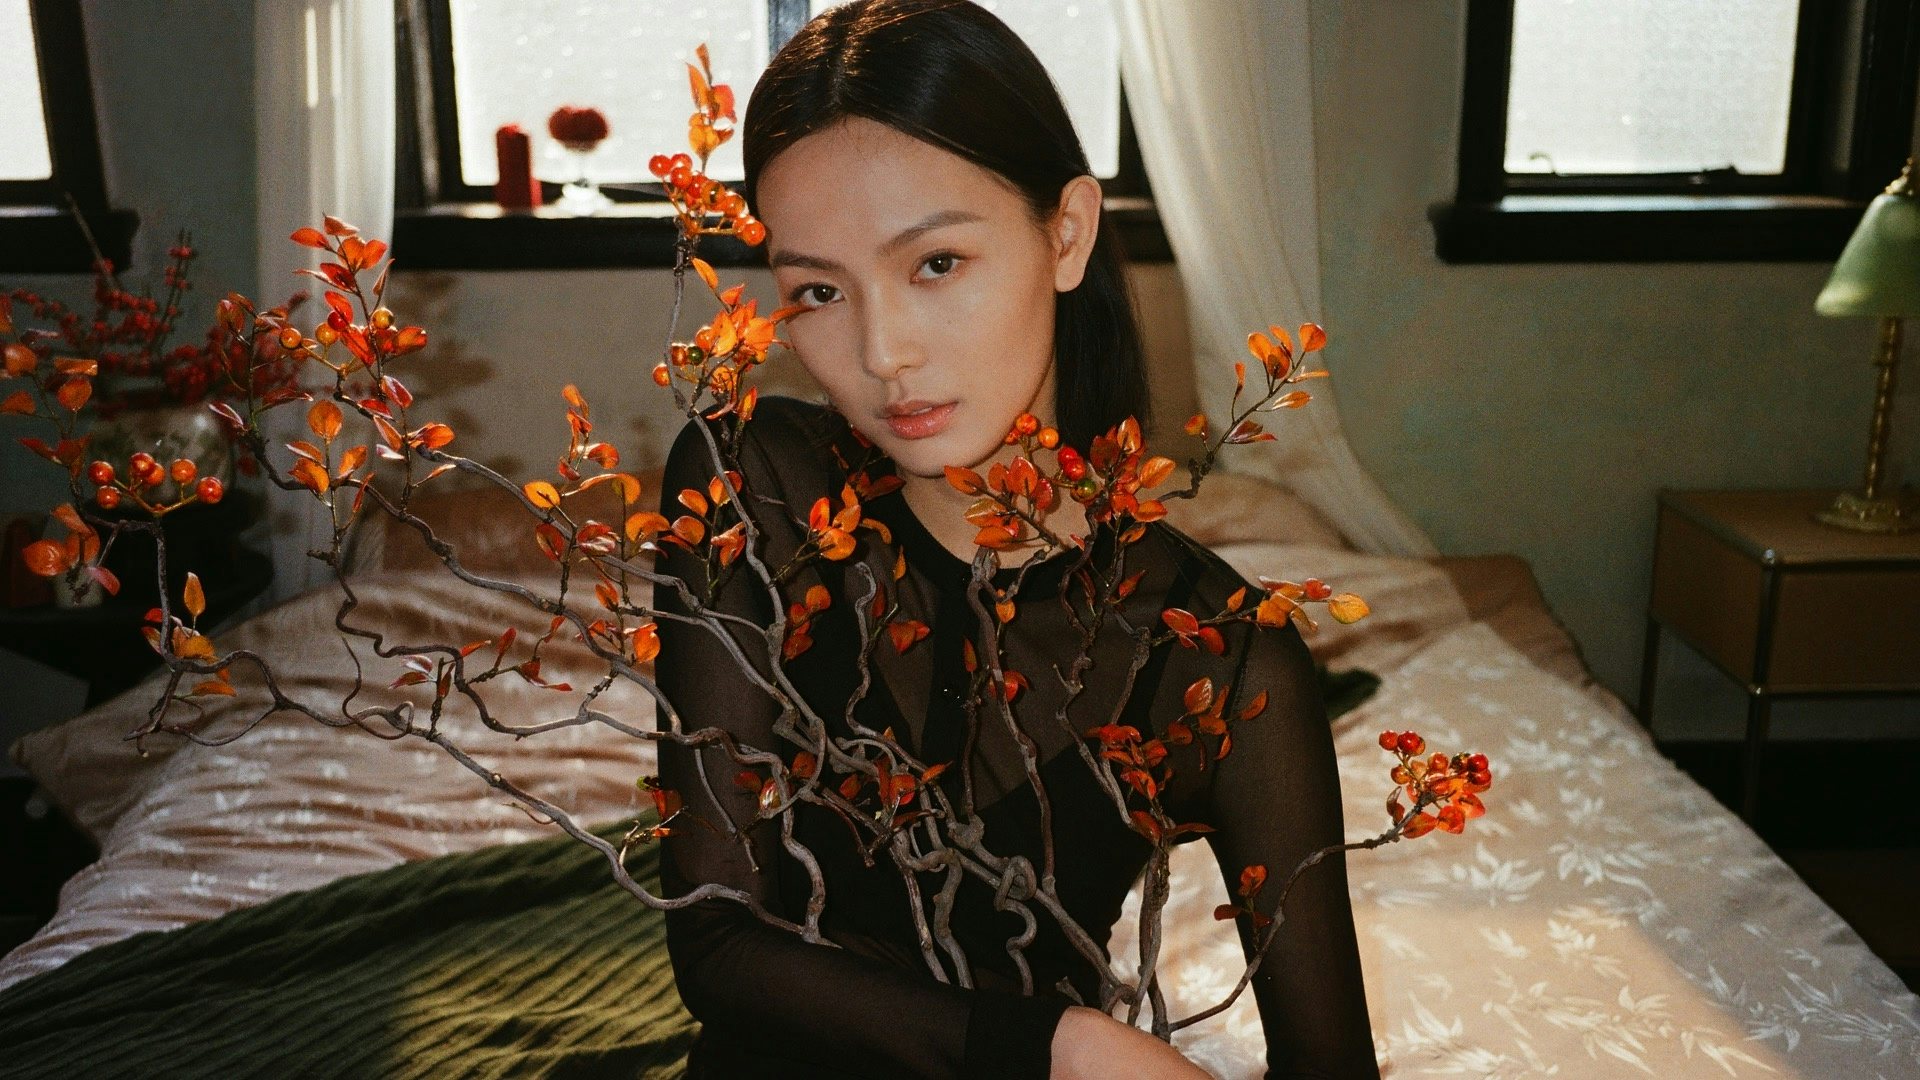 Michael Kors encourages a more relaxed approach to the Lunar New Year via the short film. Photo: Michael Kors
